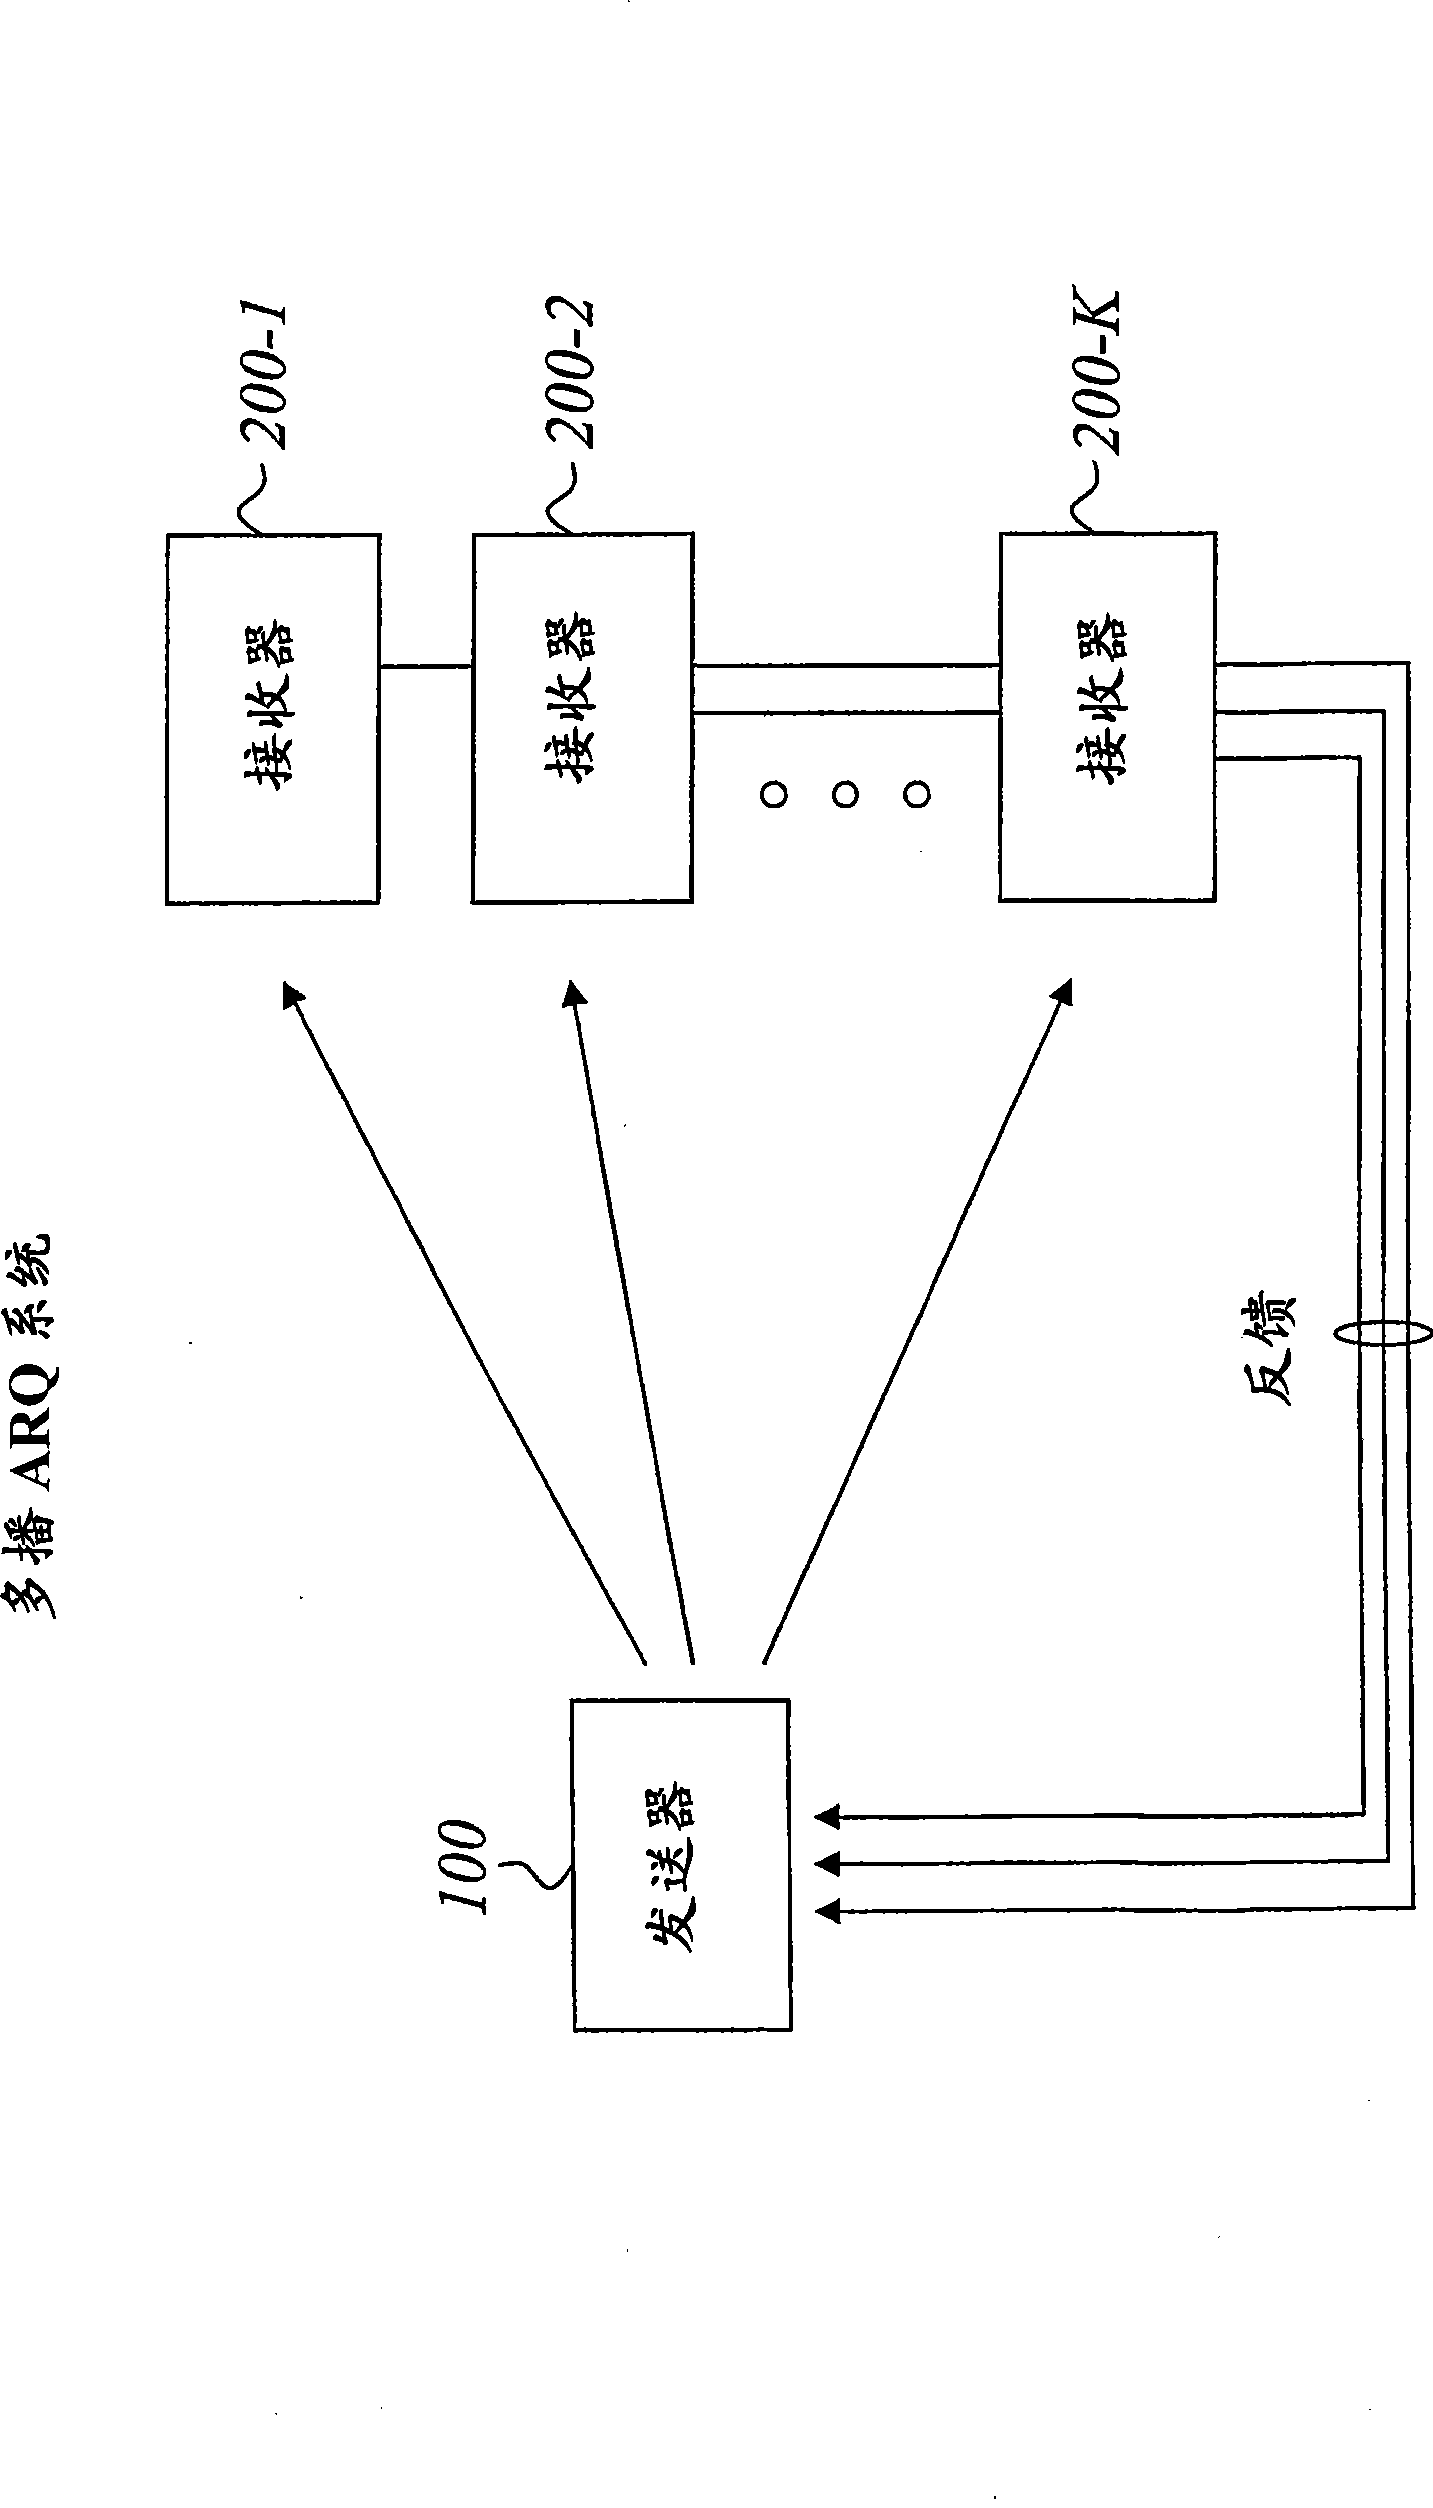 Reliable multicast with linearly independent data packet coding